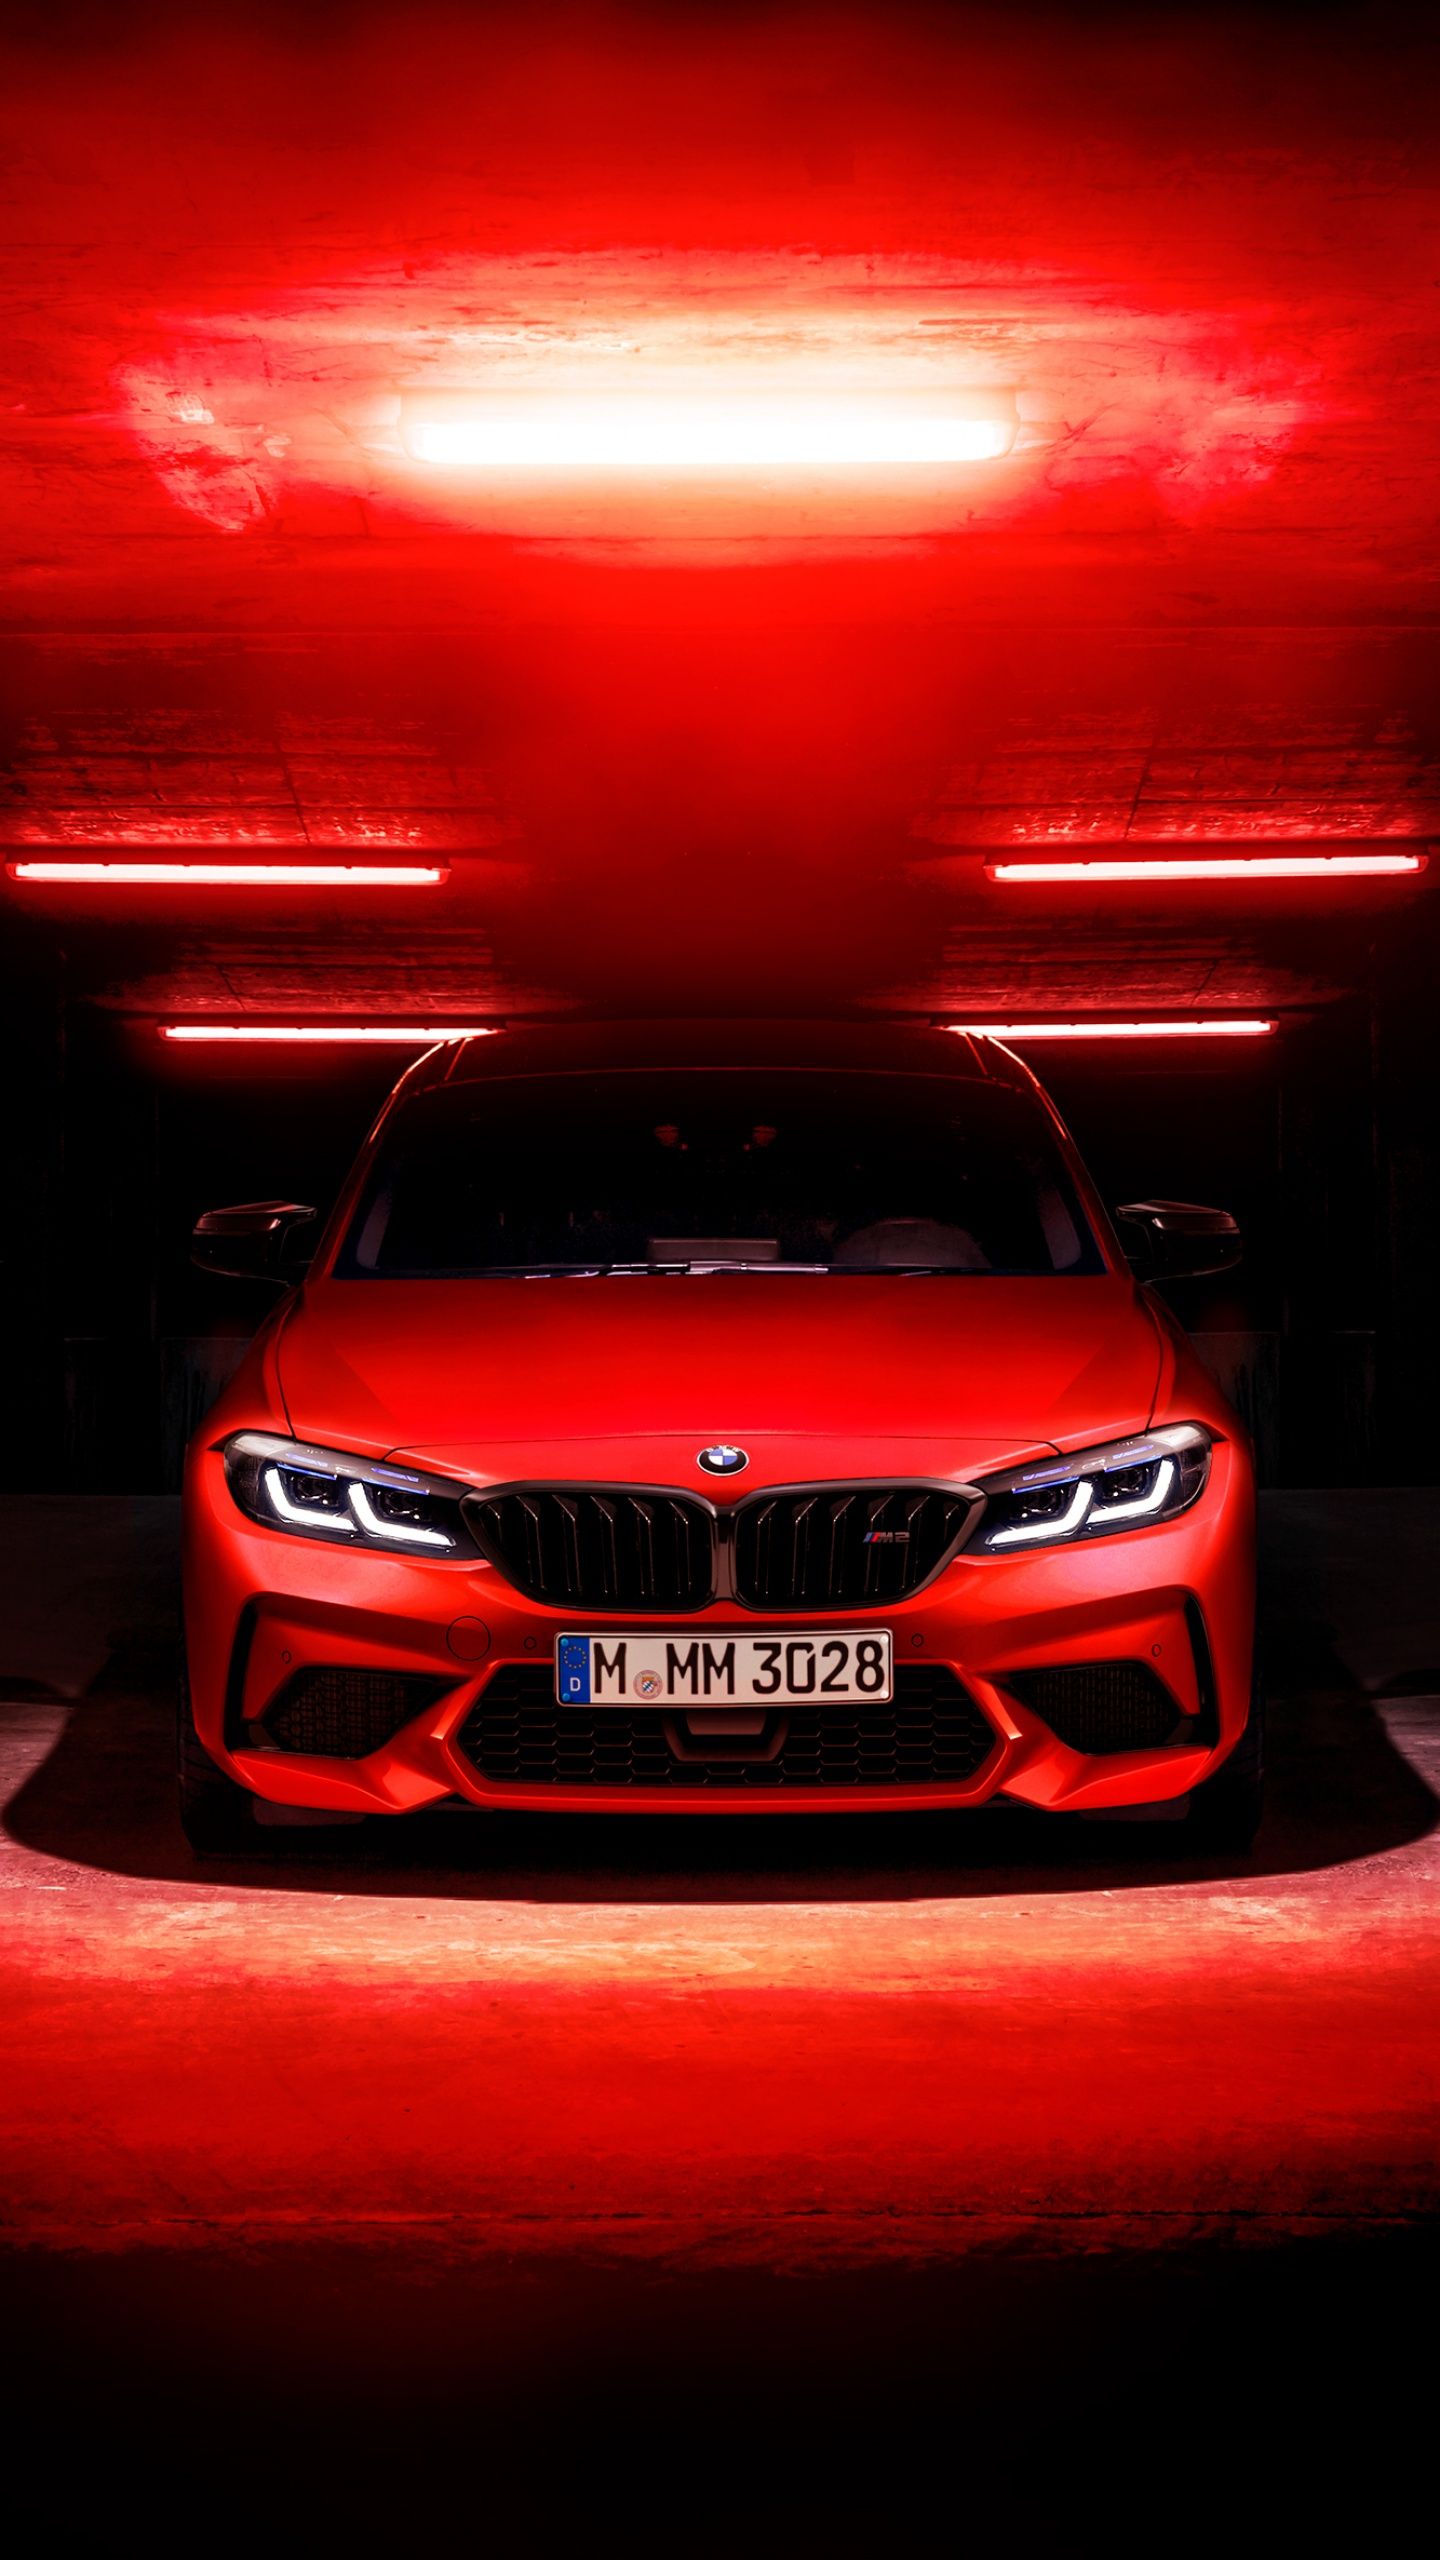 A red car is in the dark - BMW